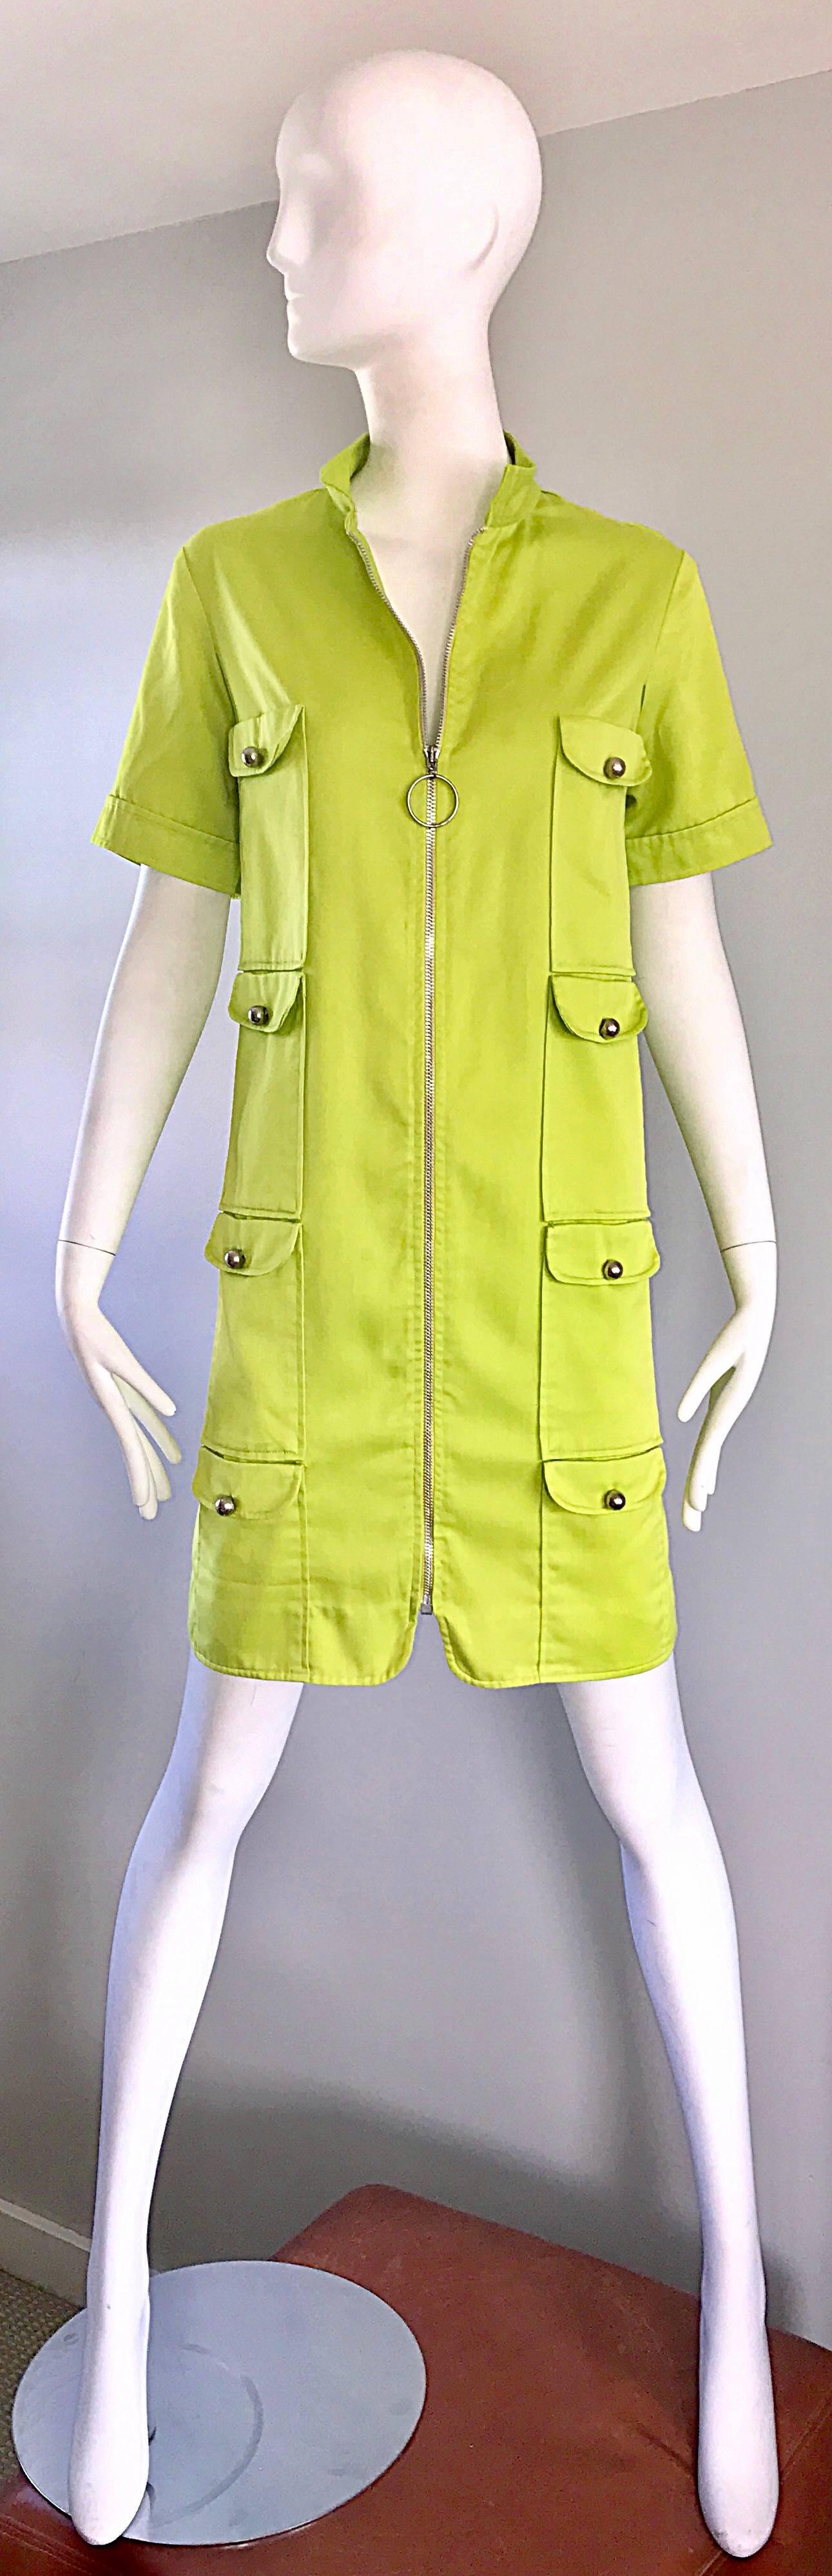 Chic 1960s I. MAGNIN lime green cargo pocket mod short sleeve shift dress! Features four functional cargo pocket on each side of the dress. Metal ball button closures. Full metal zipper up the front, with oversized round metal zipper pull to control